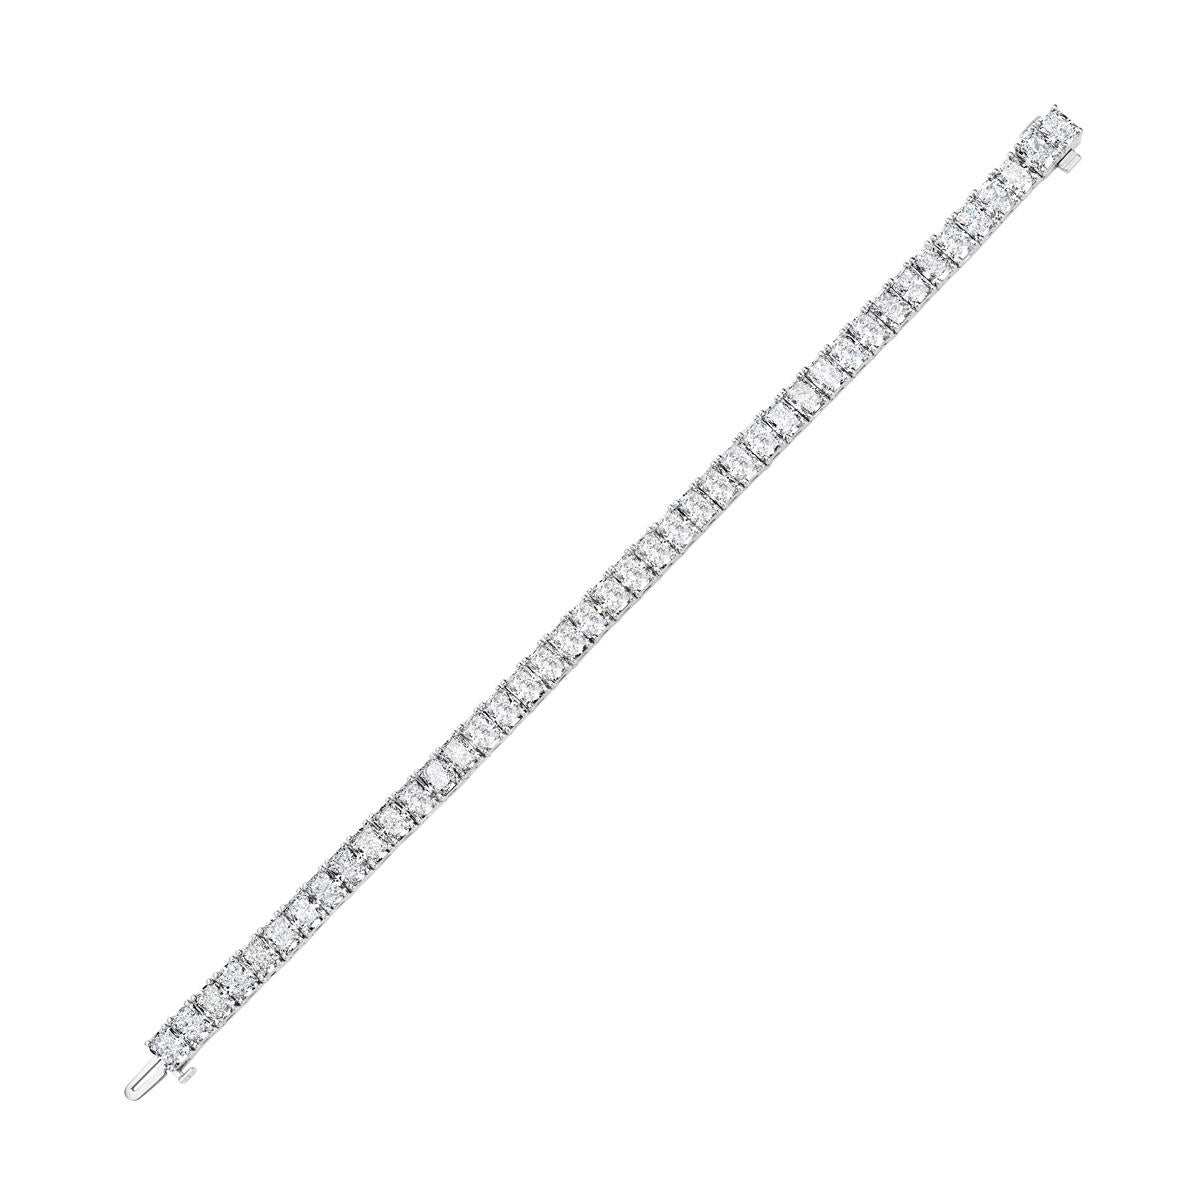 Made with 42 natural diamonds. Long Radiants approximately 0.50ct. each all GIA certified 
D-E-F Colors, VS1-VS2-SI1 clarities. (List available upon request) without visible inclusions.
Made in USA with the best quality. Platinum
Lenght: 7 Inches